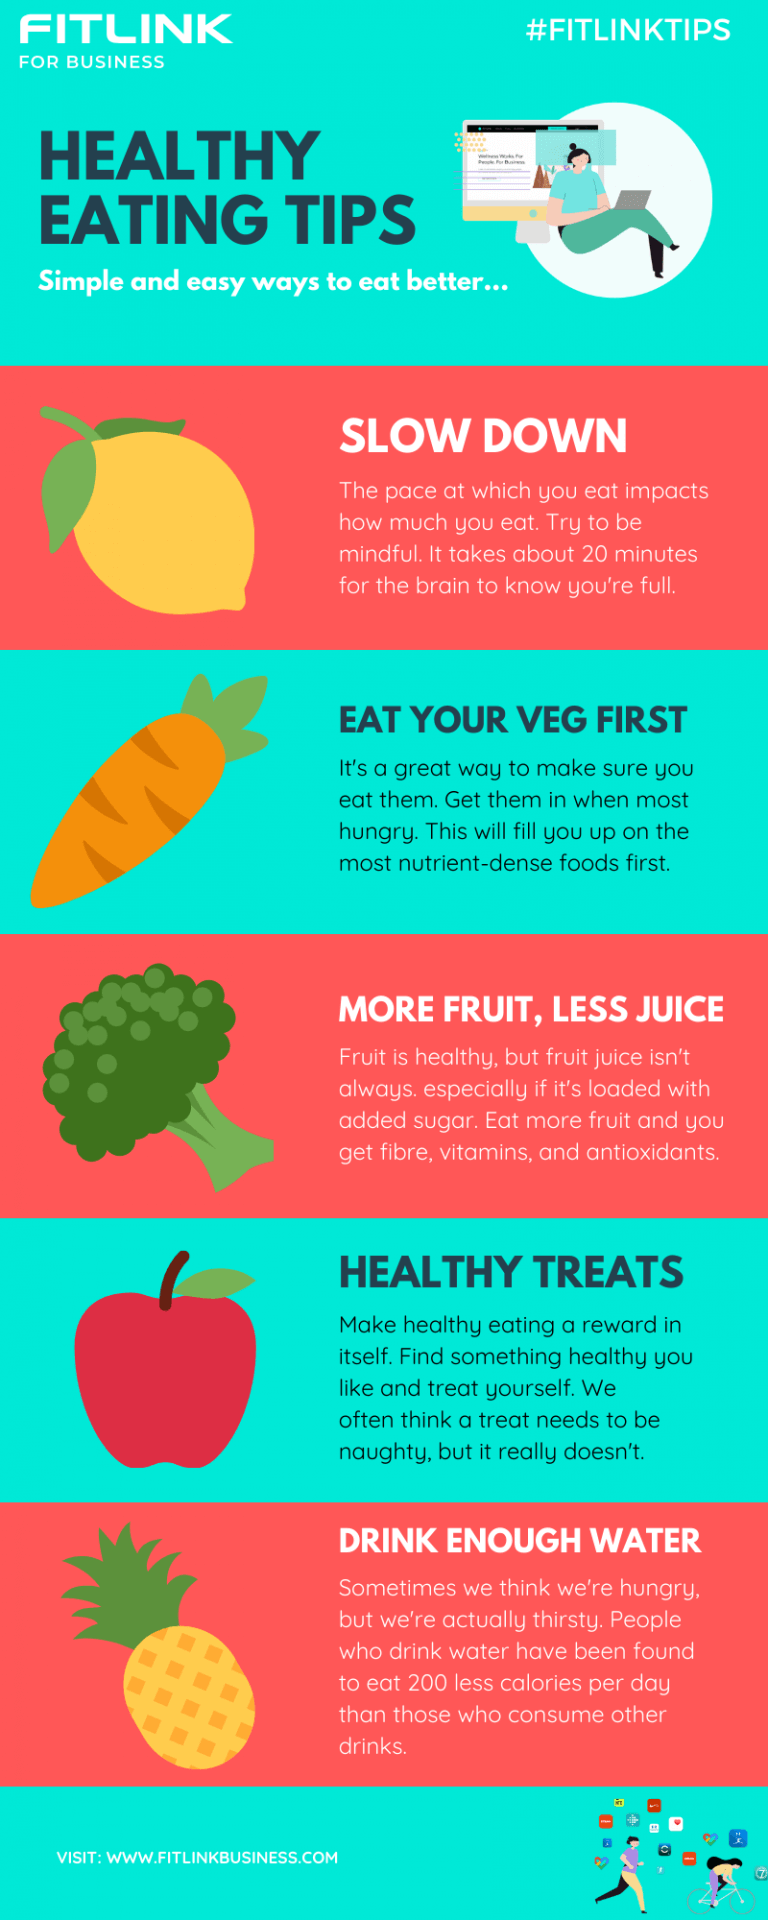 Healthy eating tips when you work from home